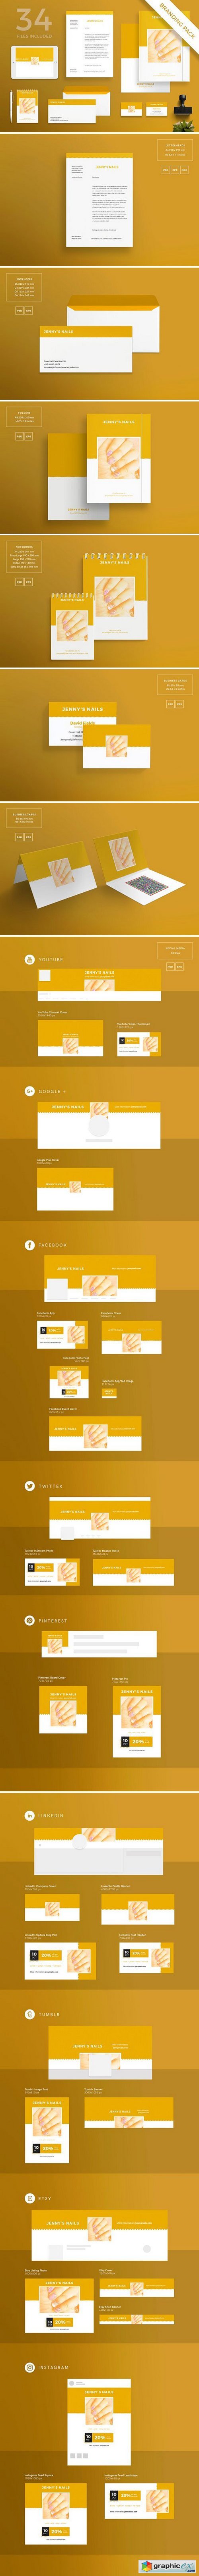 Branding Pack | Nails Style